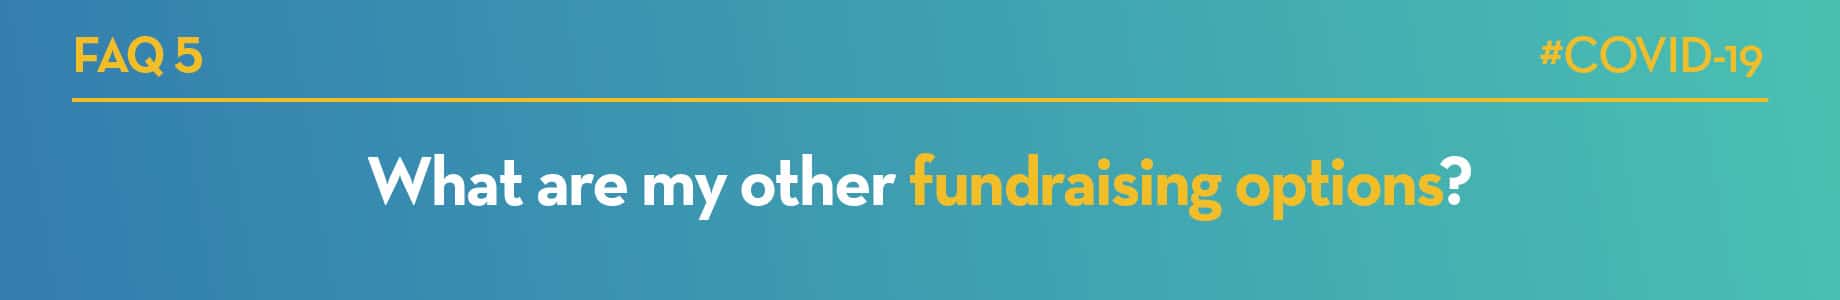 What are my other fundraising options?